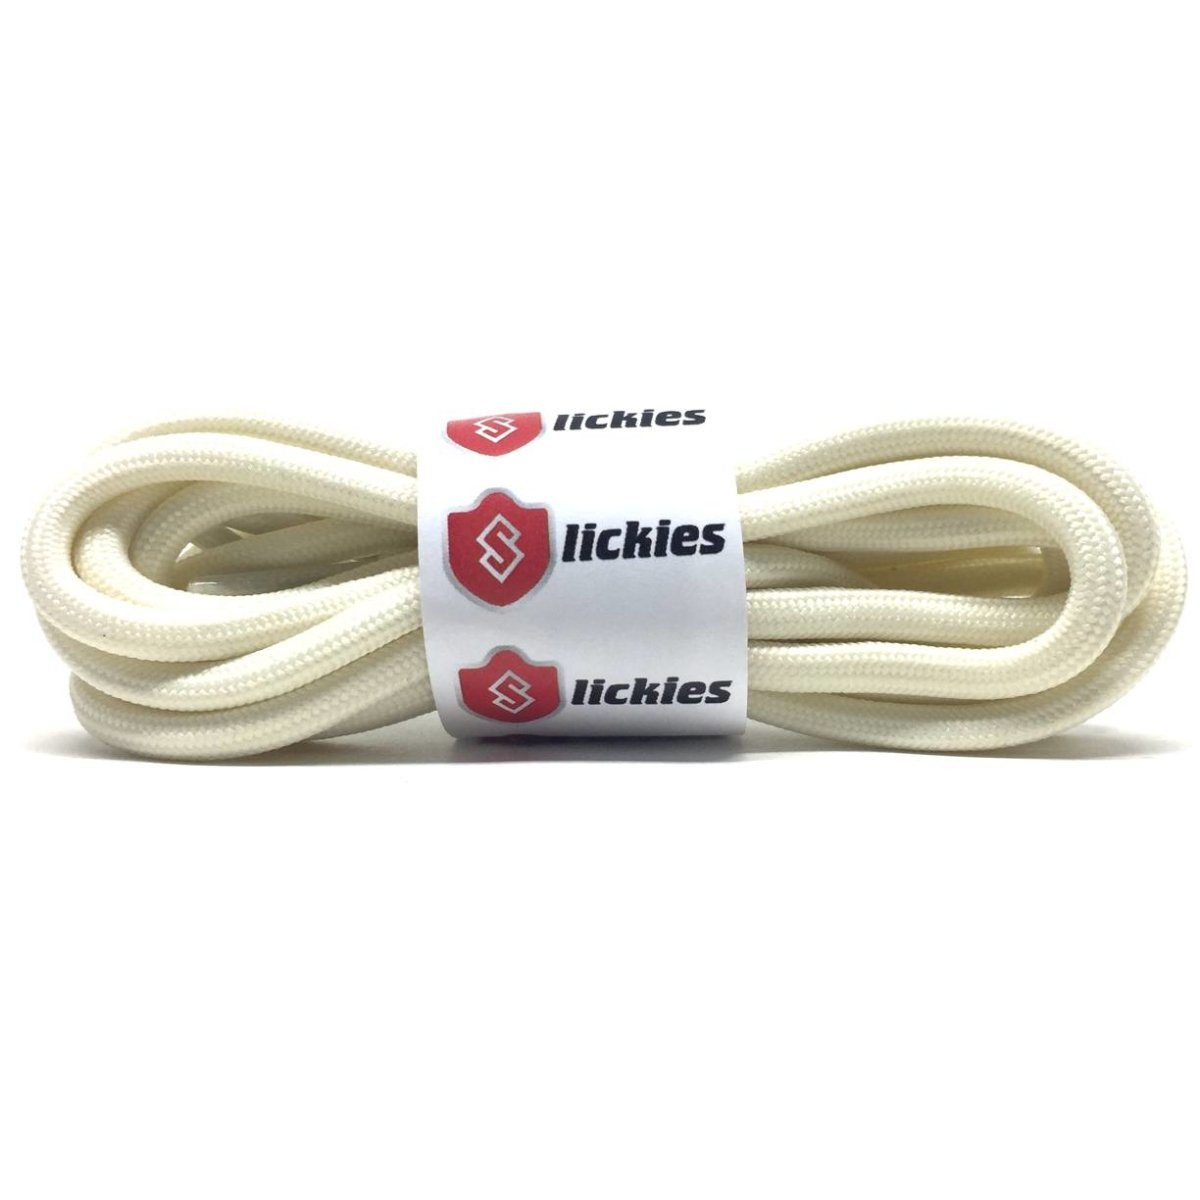 Premium Rope Shoe Laces For Yeezy Boost V2 350 Desert Sage True Form Beluga  Tail Light Clay Pirate Black Turtledove YZY -  Portugal